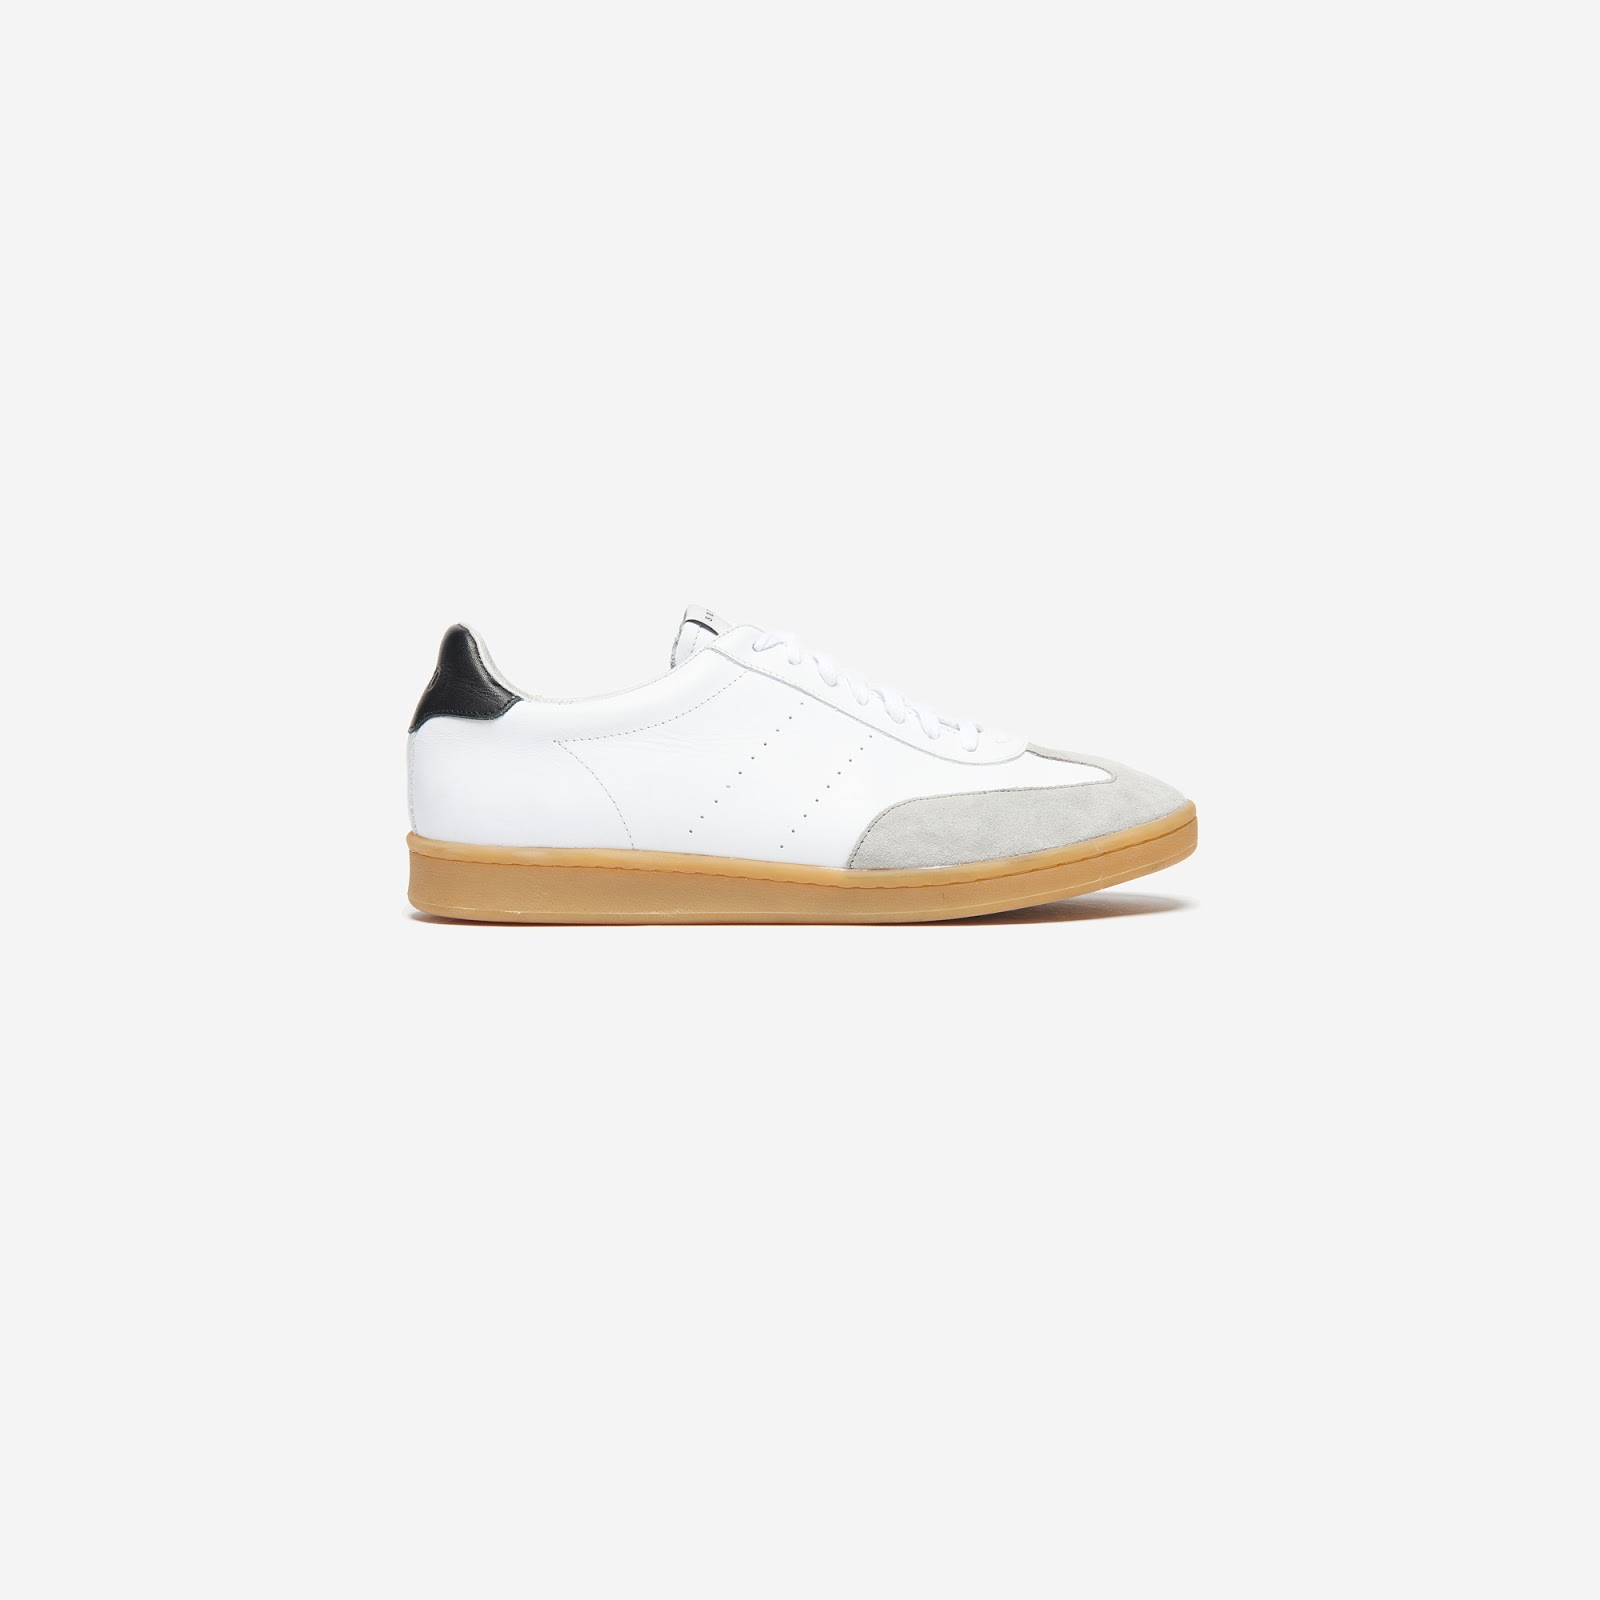 Neutral Necessities: Sandro SX-01 Trainers | SHOEOGRAPHY